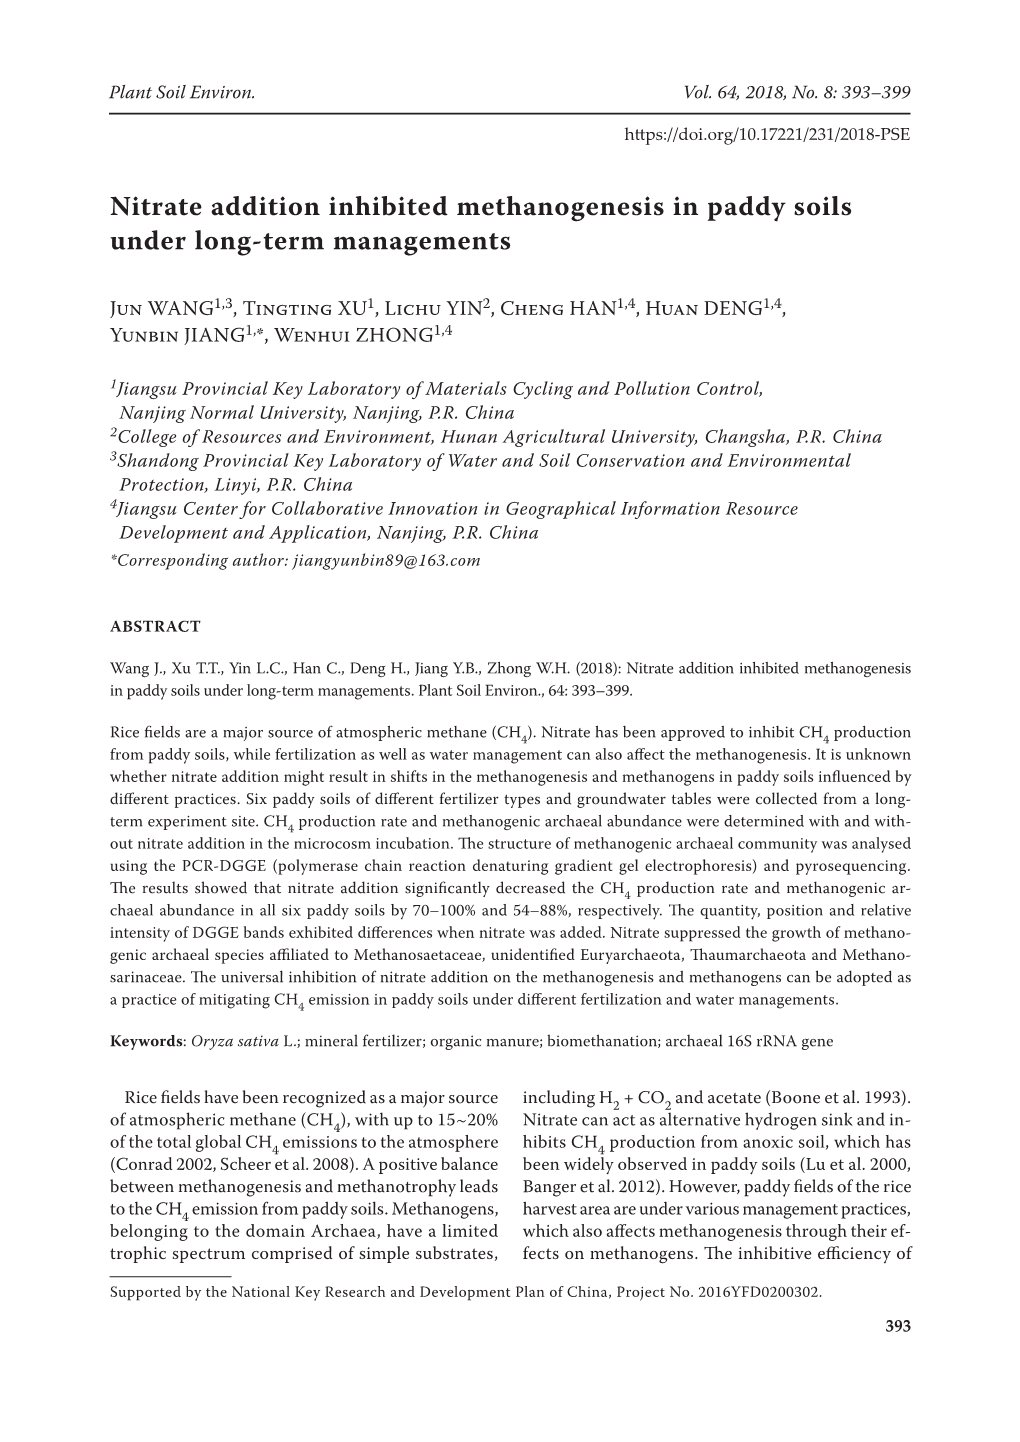 Nitrate Addition Inhibited Methanogenesis in Paddy Soils Under Long-Term Managements